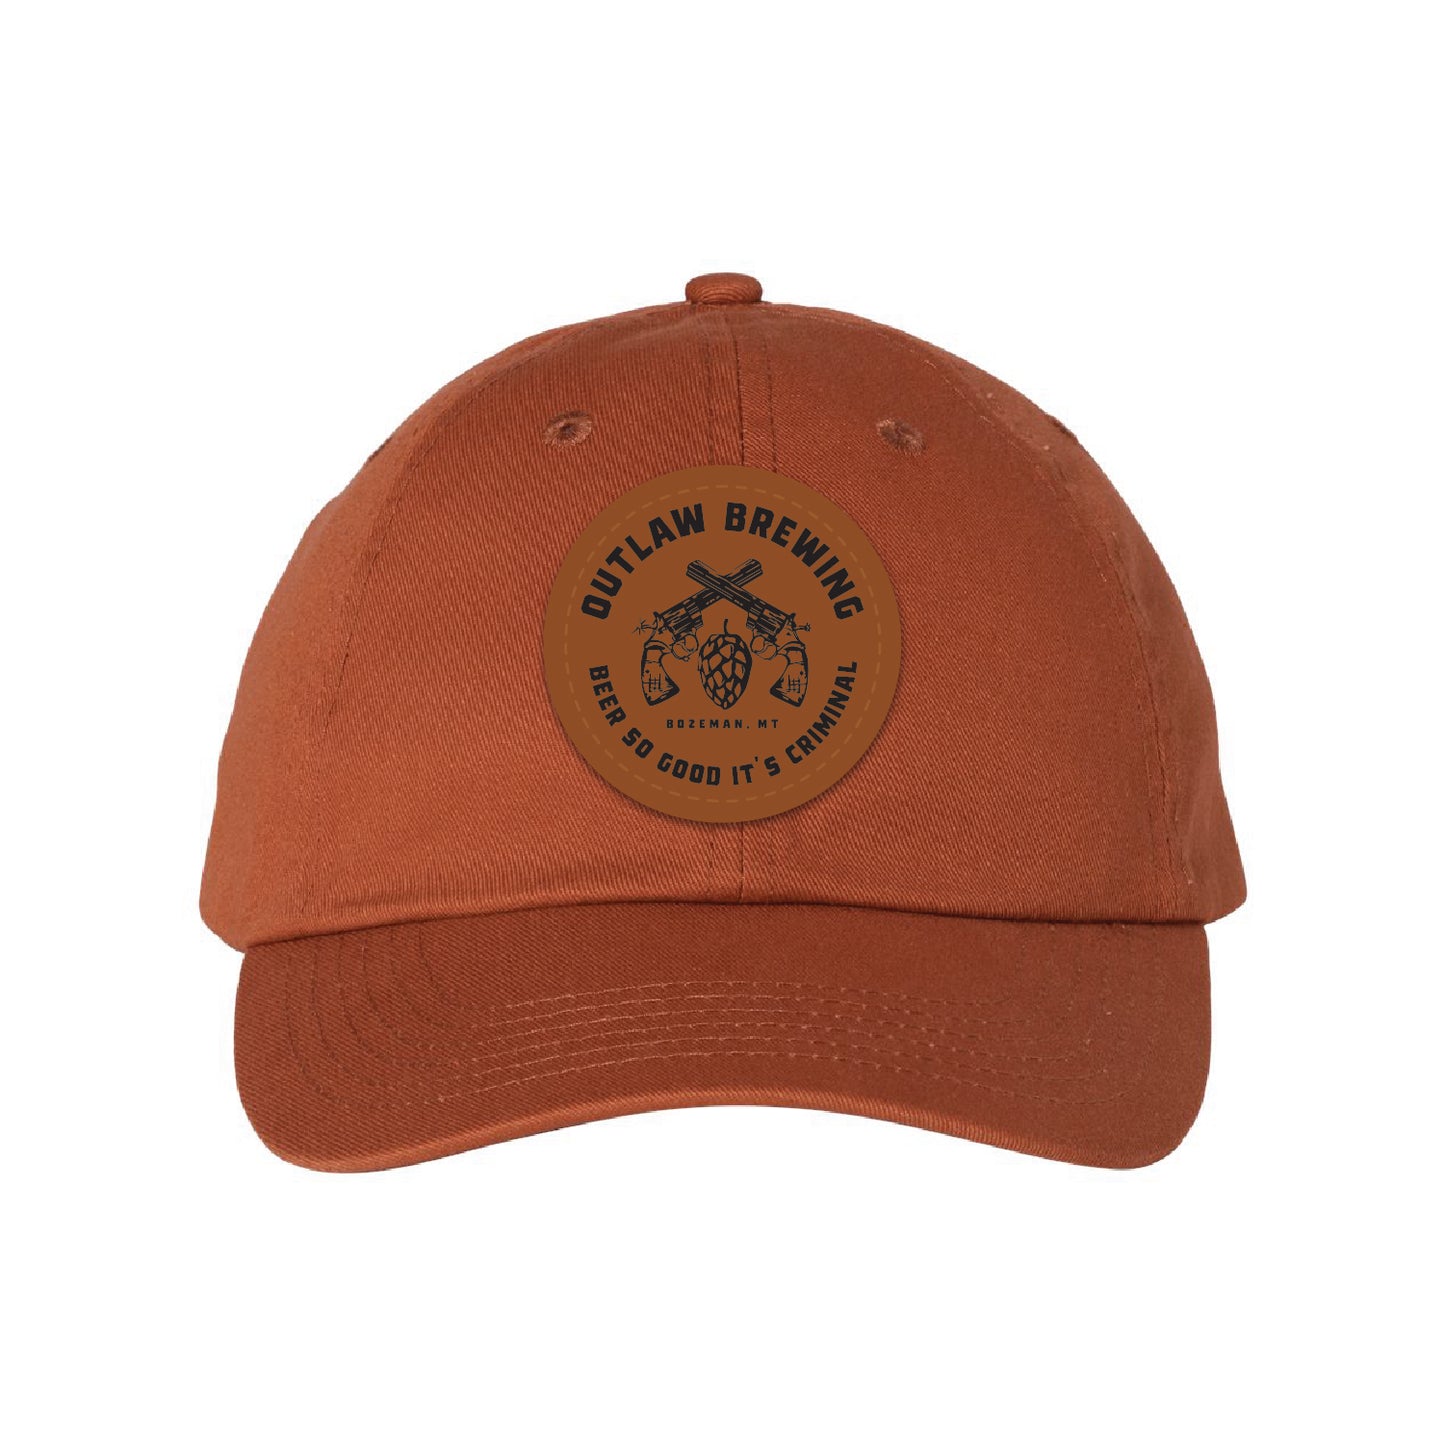 Outlaw Brewing Dad Cap